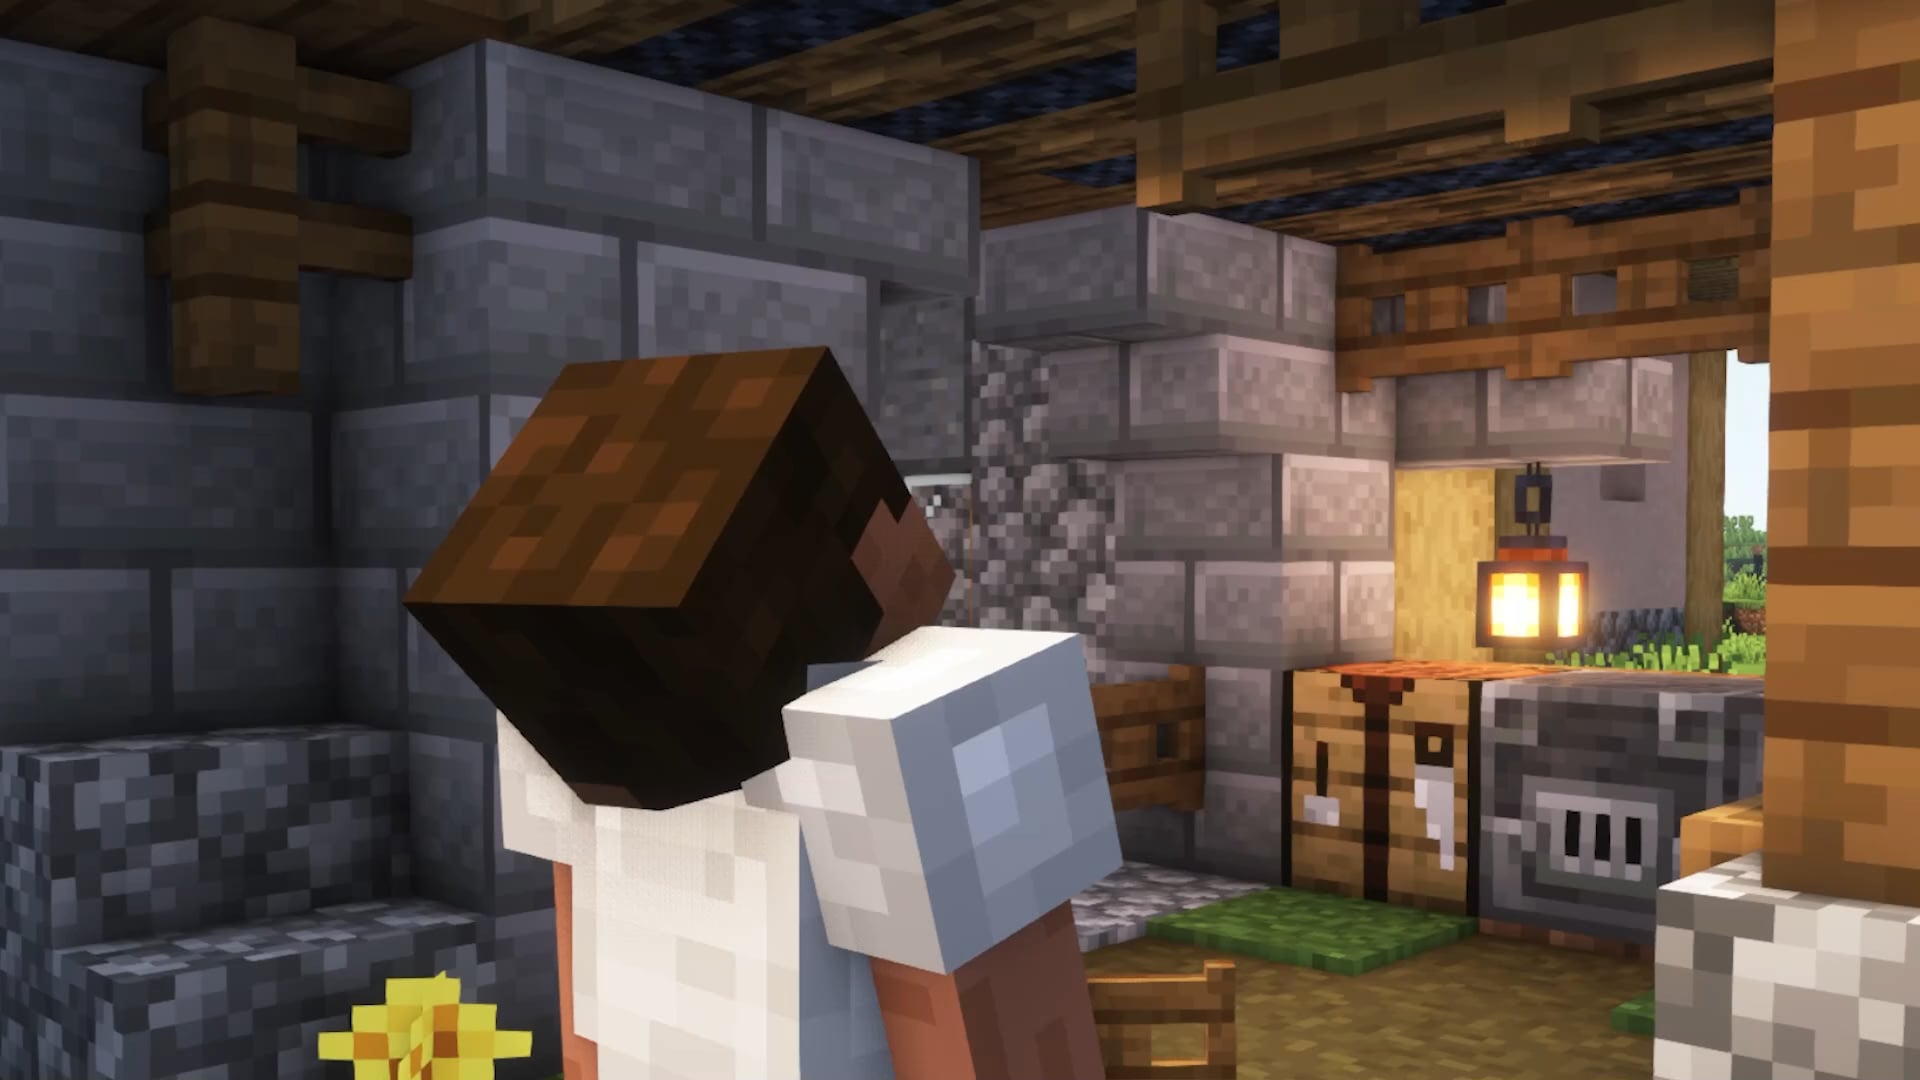 Minecraft Memes - "Steve, Actually Thinking"